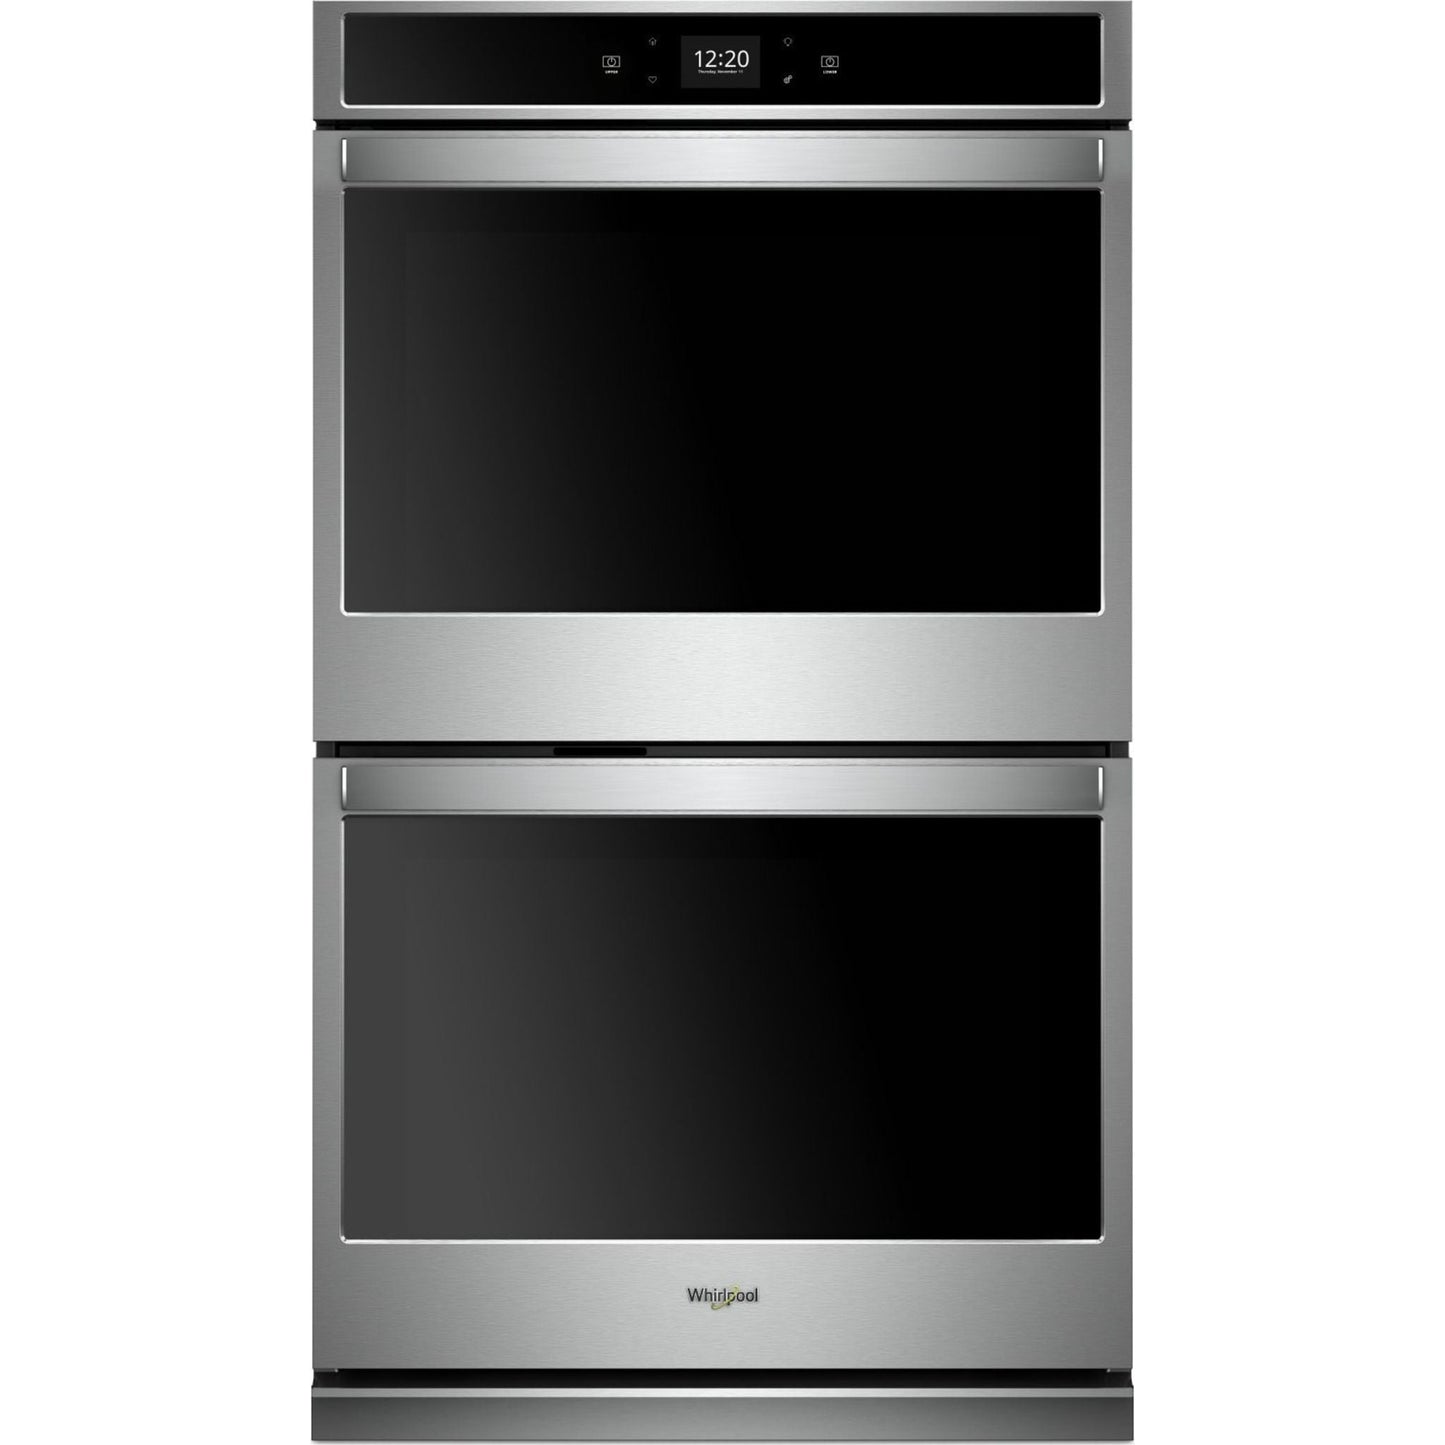 Whirlpool 30" Double Wall Oven (WOD51EC0HS) - Stainless Steel